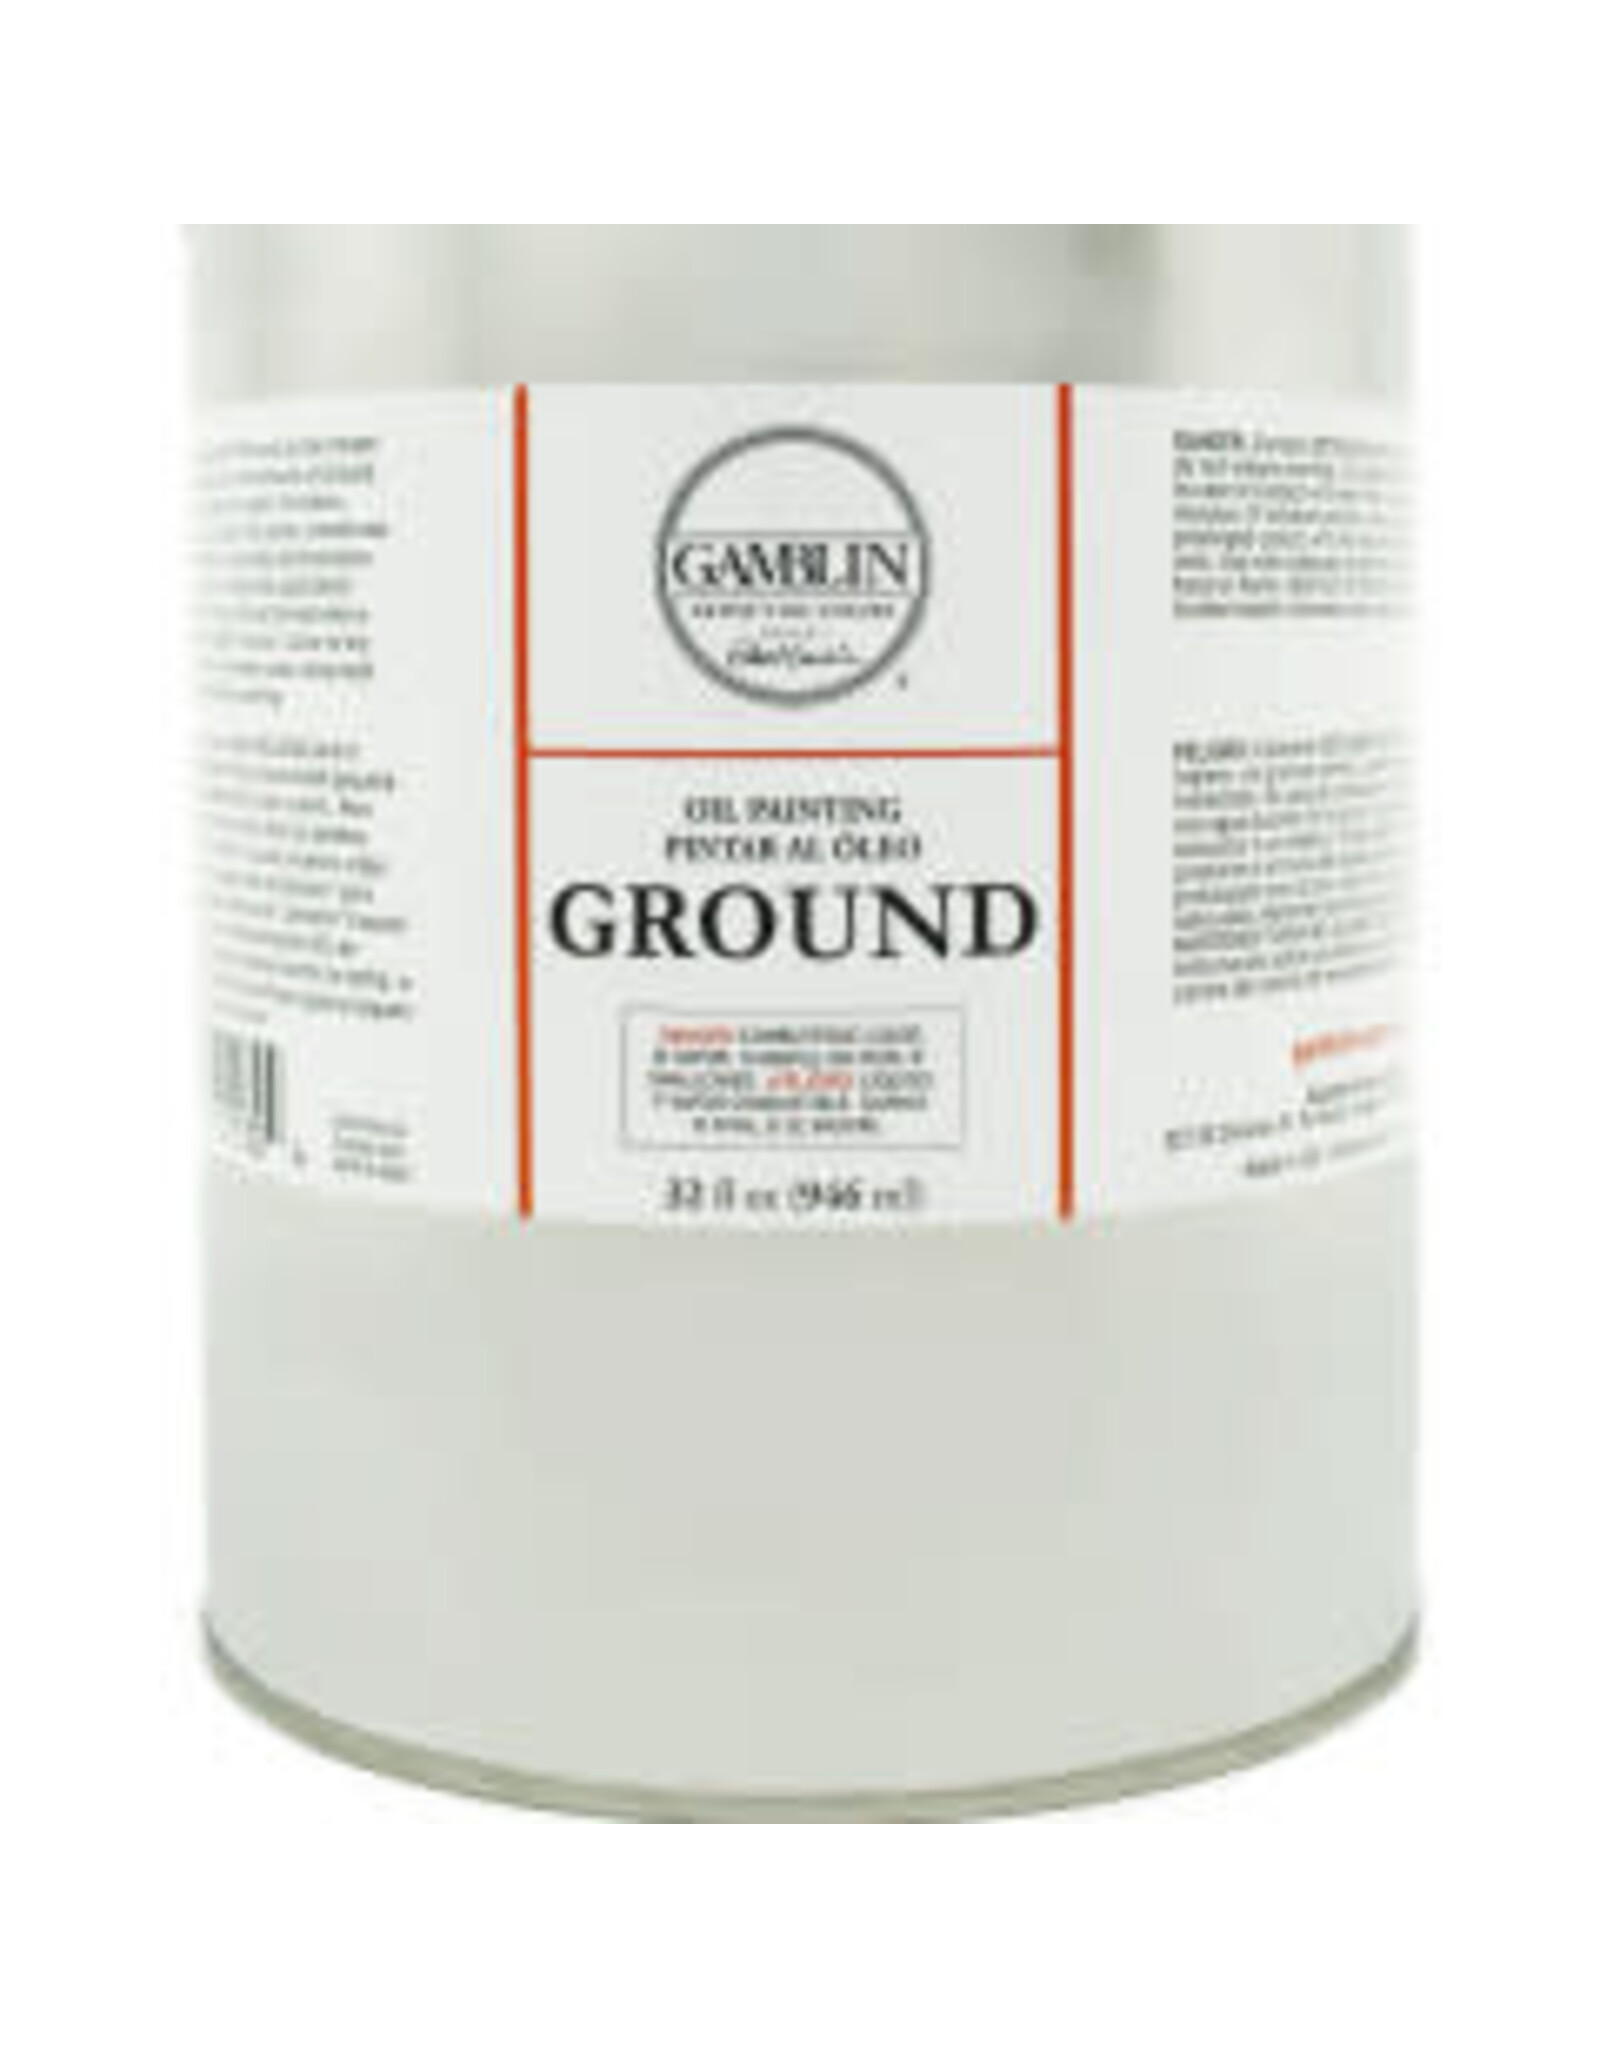 CLEARANCE DENTED CAN Gamblin Oil Painting Ground, 32oz